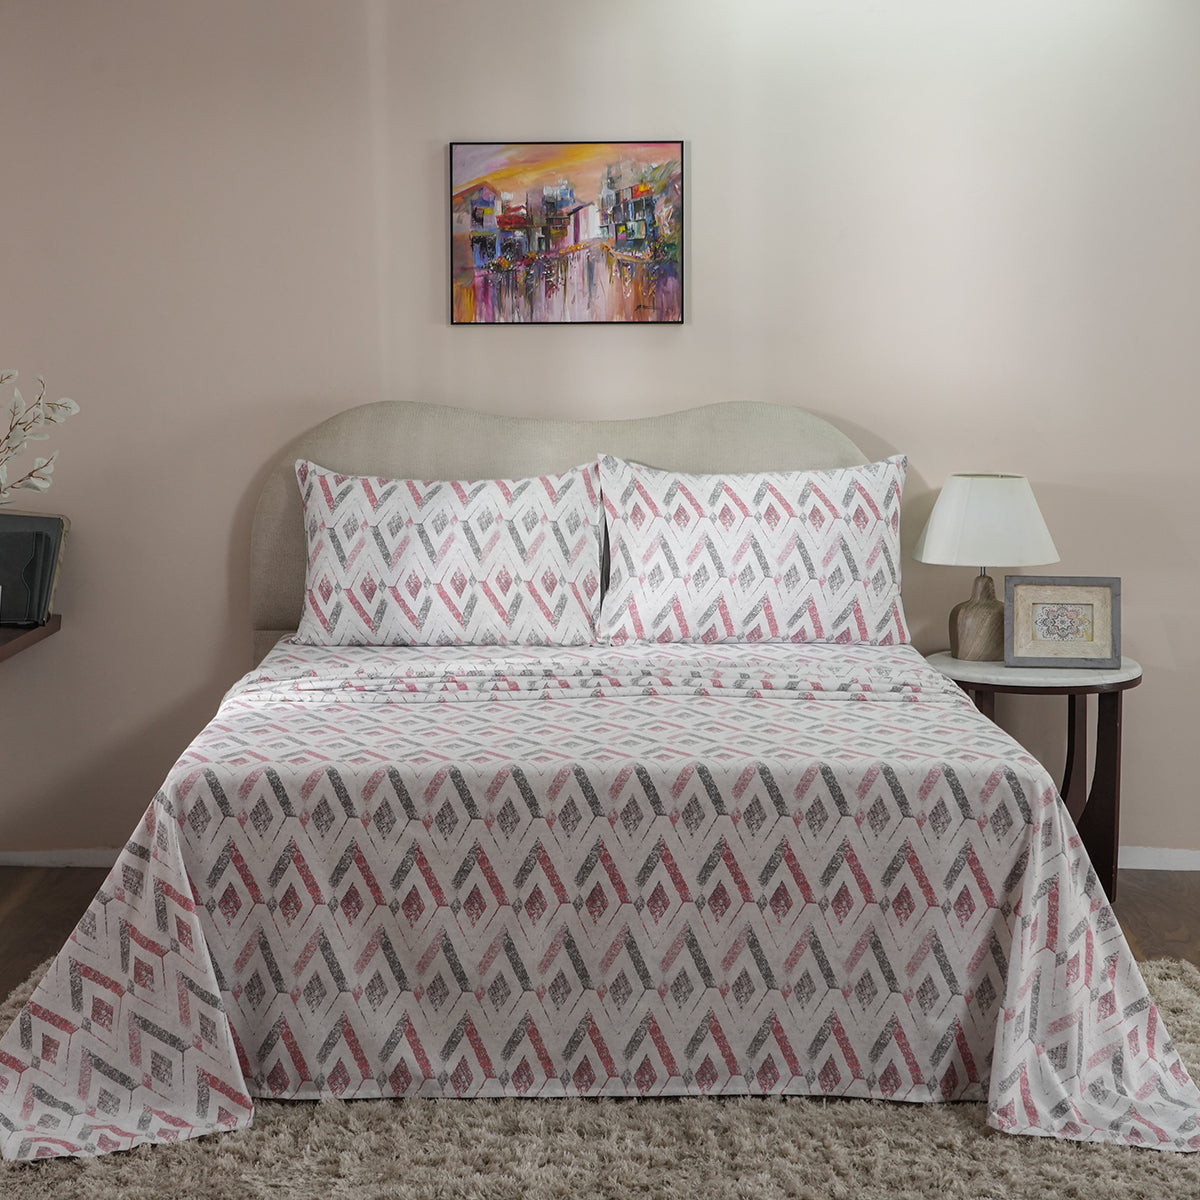 Hues PBS Refined Retro 210 TC Damascus Bed Sheet With Pillow Cover